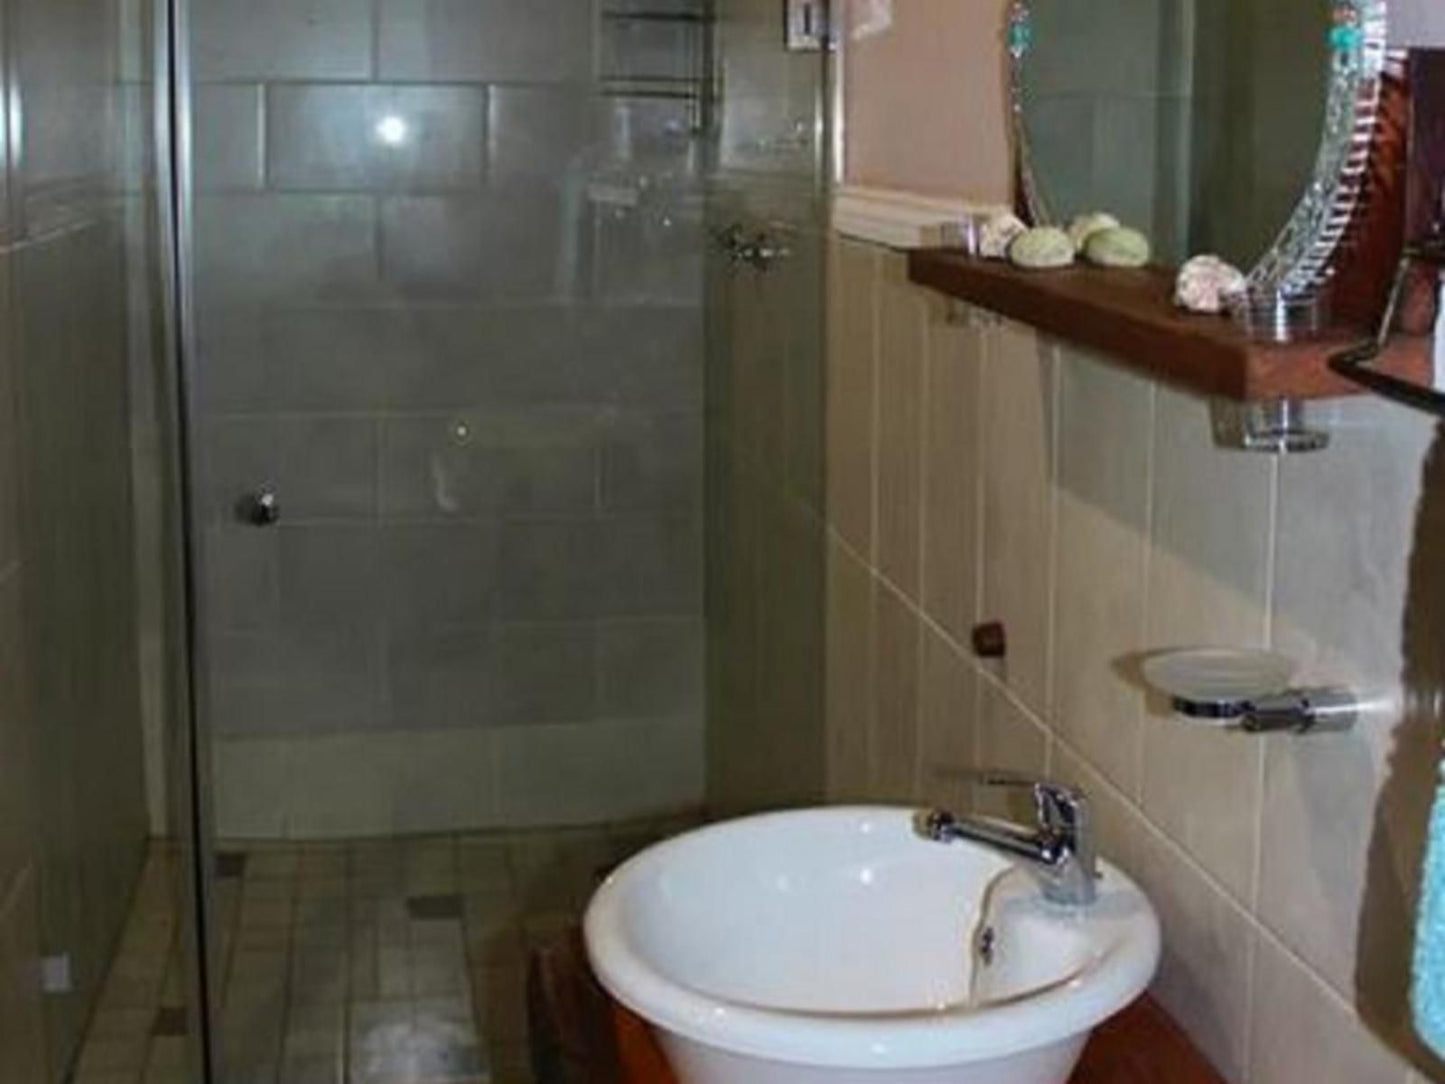 The Orchid Guesthouse Vaalwater Limpopo Province South Africa Bathroom